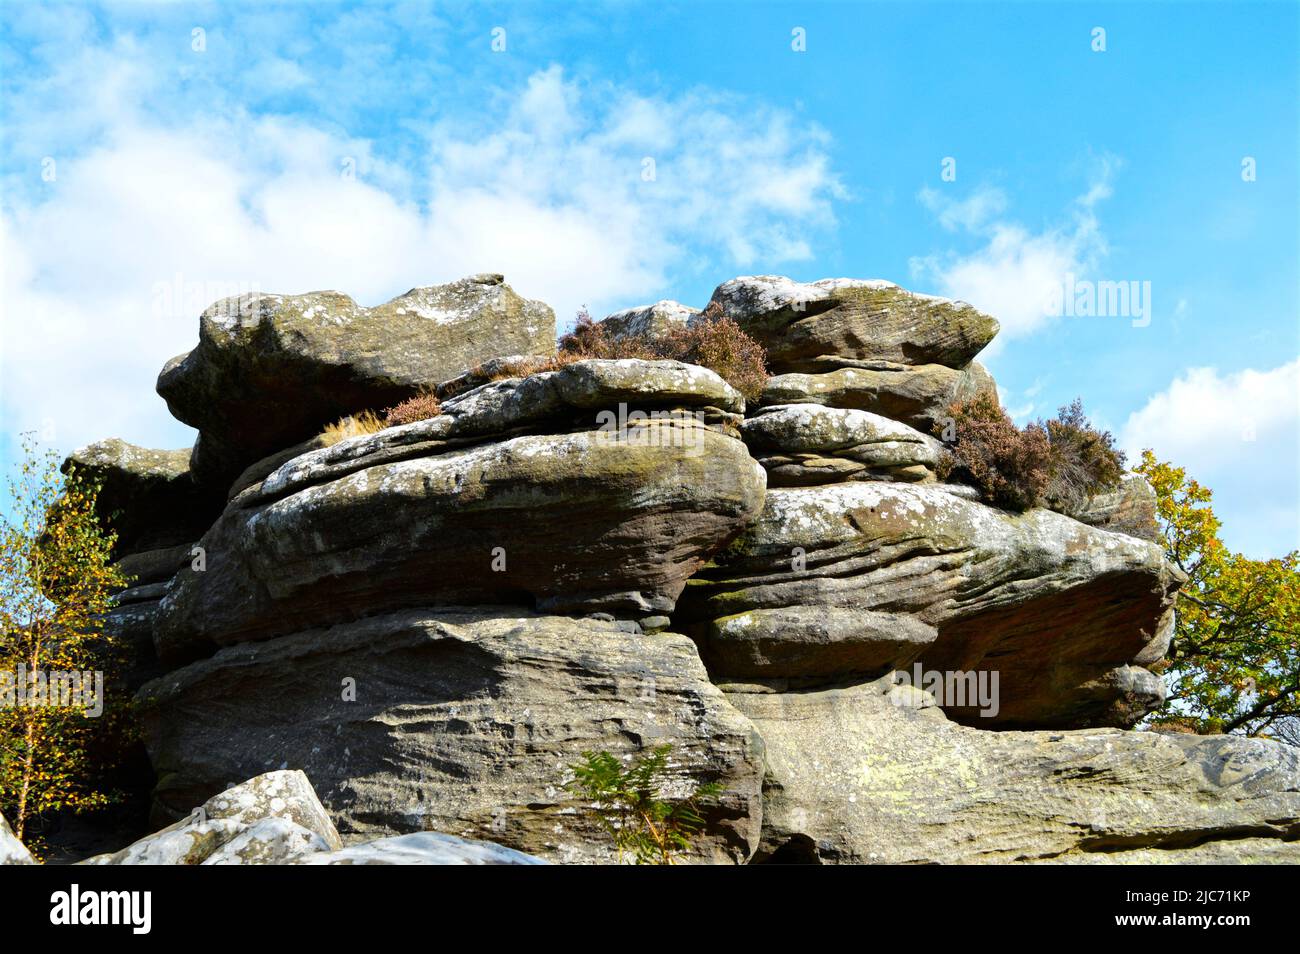 Bingham rocks is a Site of Special Scientific Interest formed over 325 million years ago, in Harrogate North Yorkshire UK Stock Photo